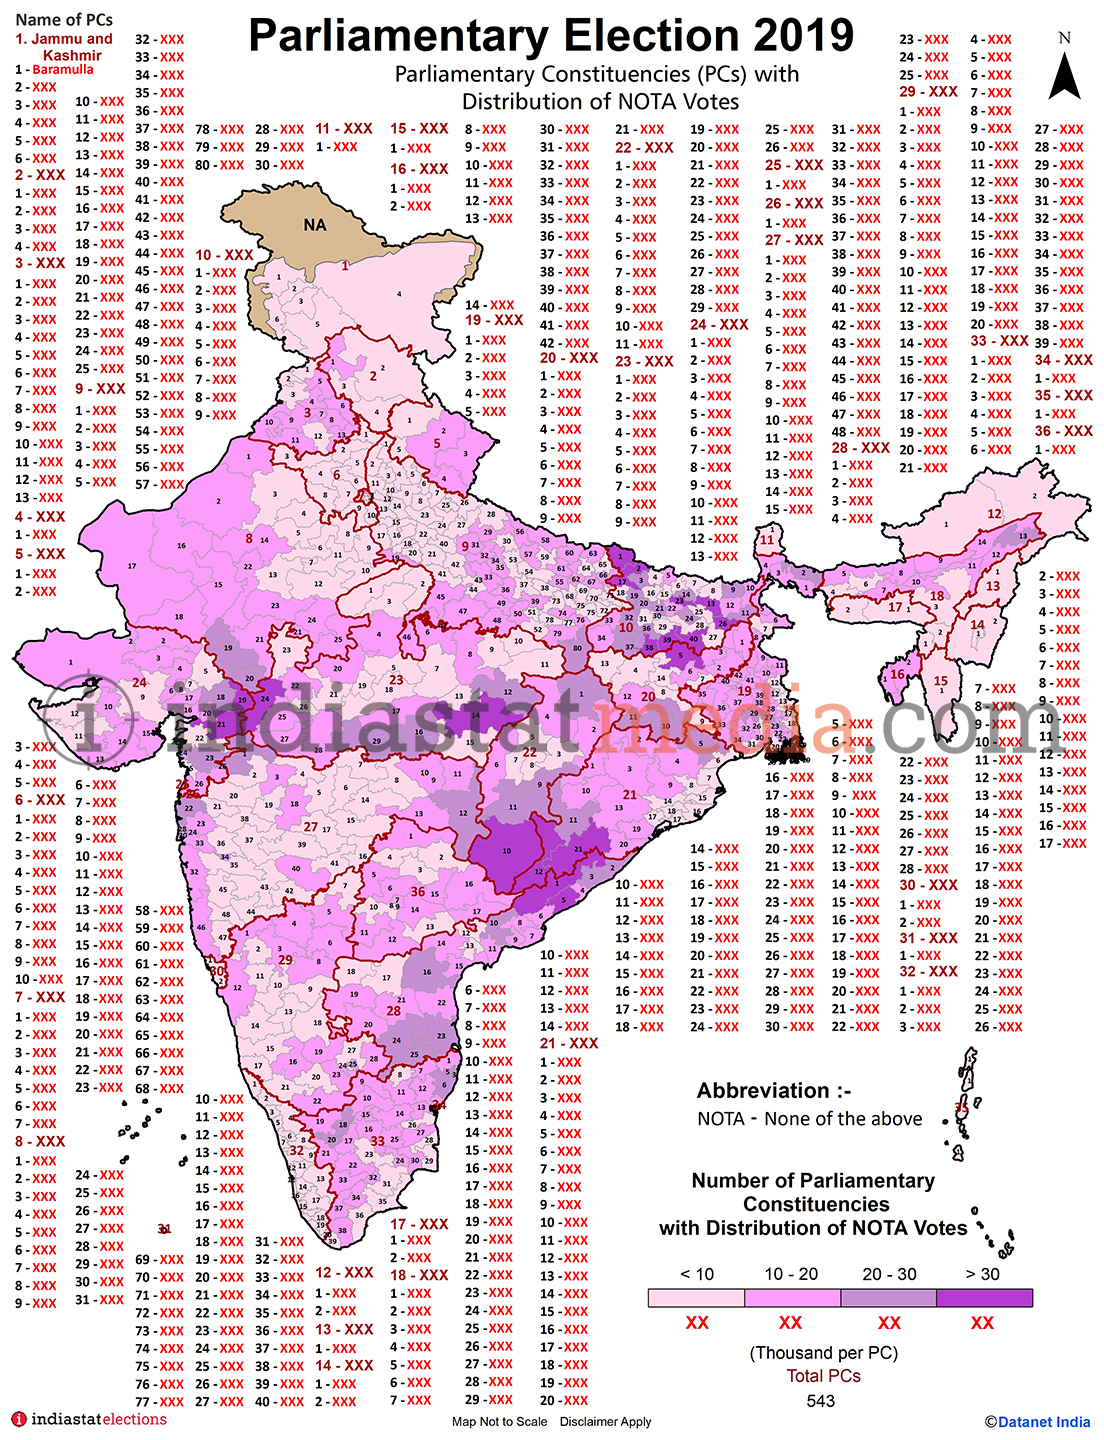 Distribution of NOTA Votes by Parliamentary Constituencies in India (Parliamentary Election - 2019)